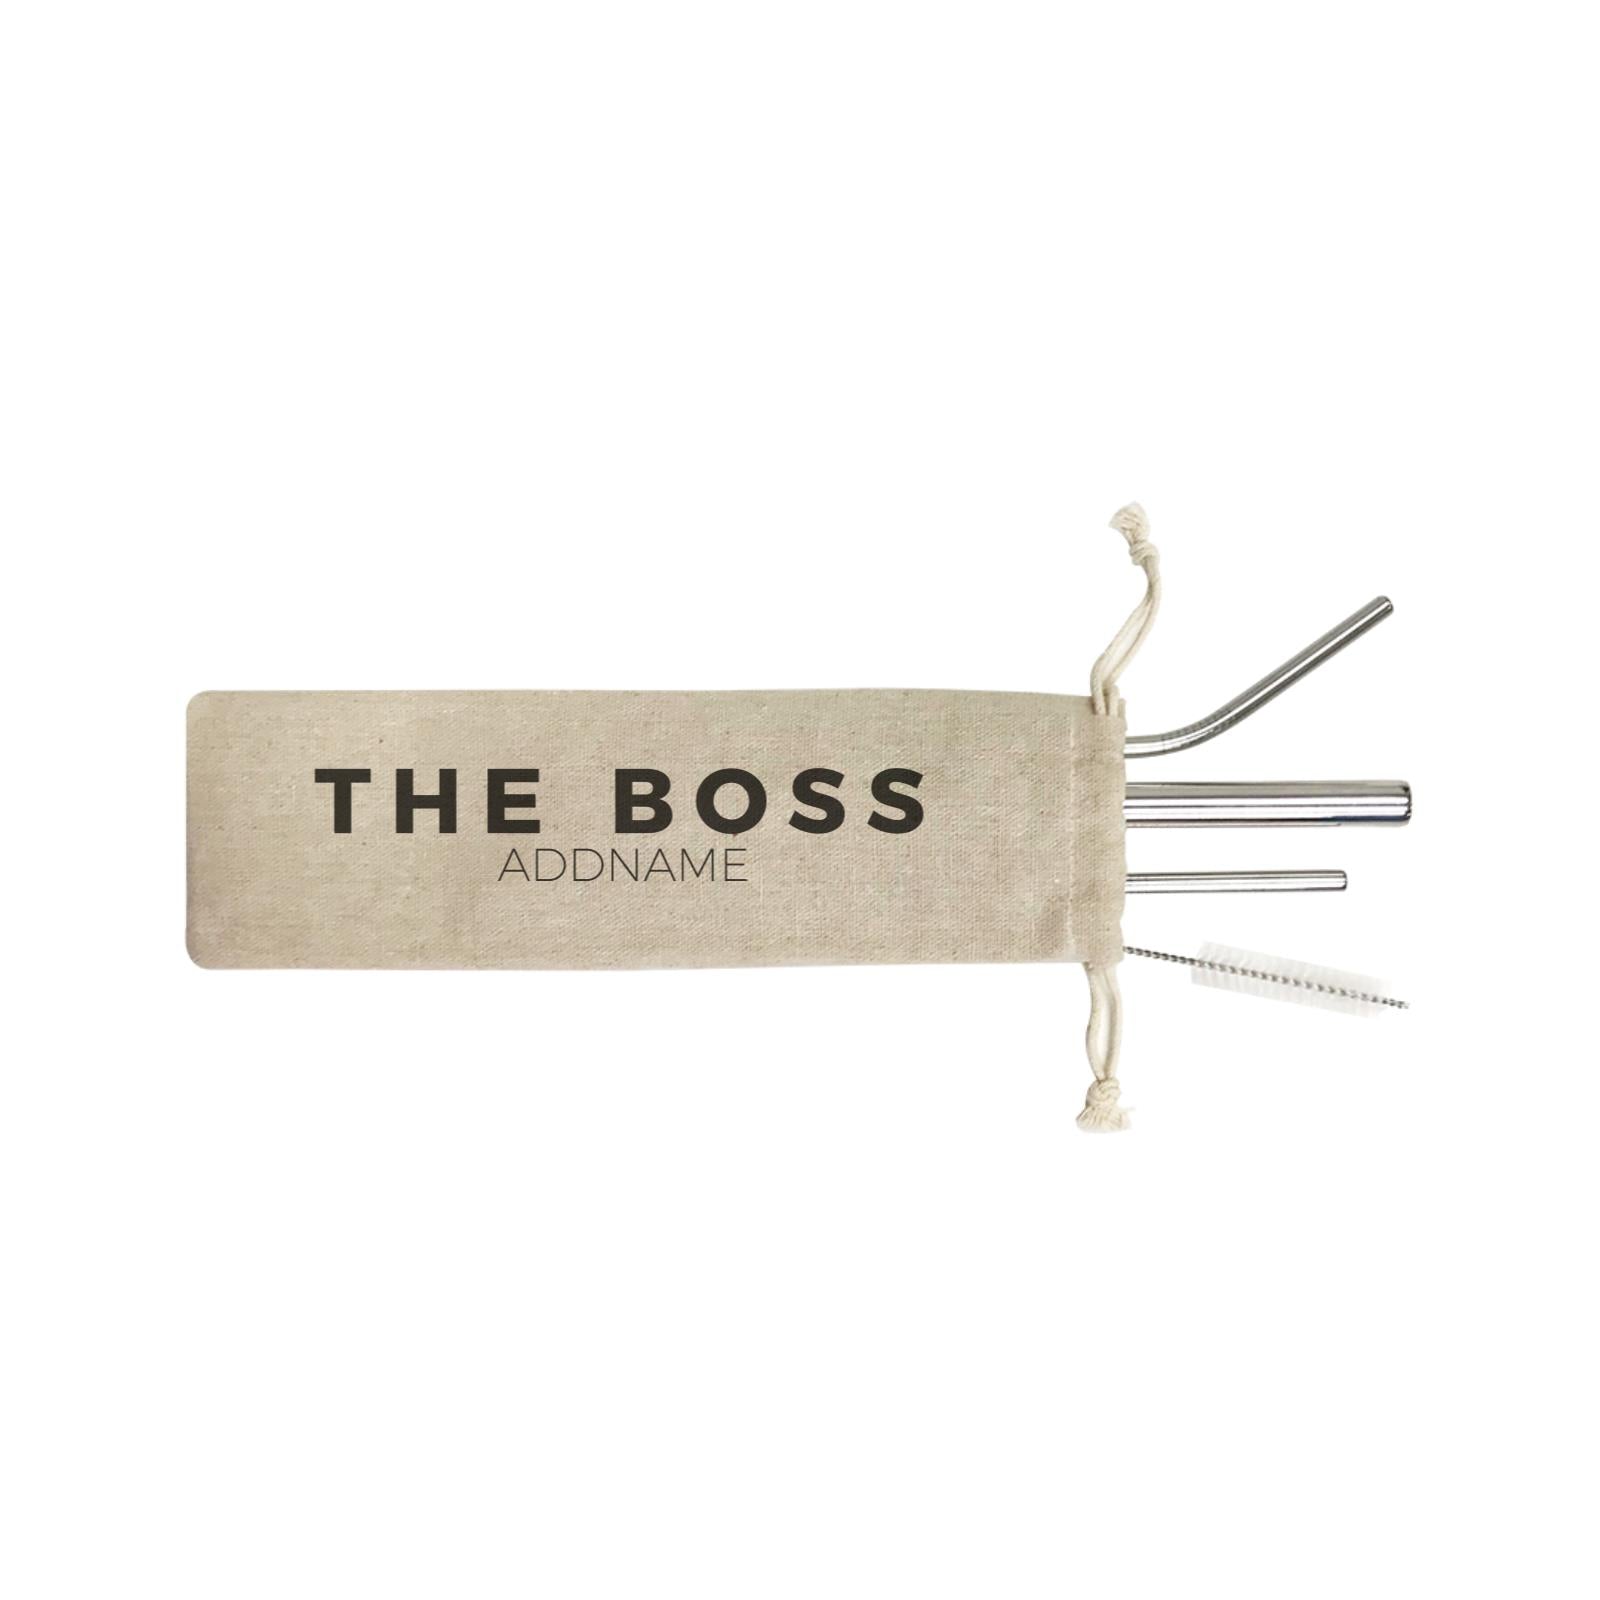 The Boss Addname SB 4-In-1 Stainless Steel Straw Set in Satchel